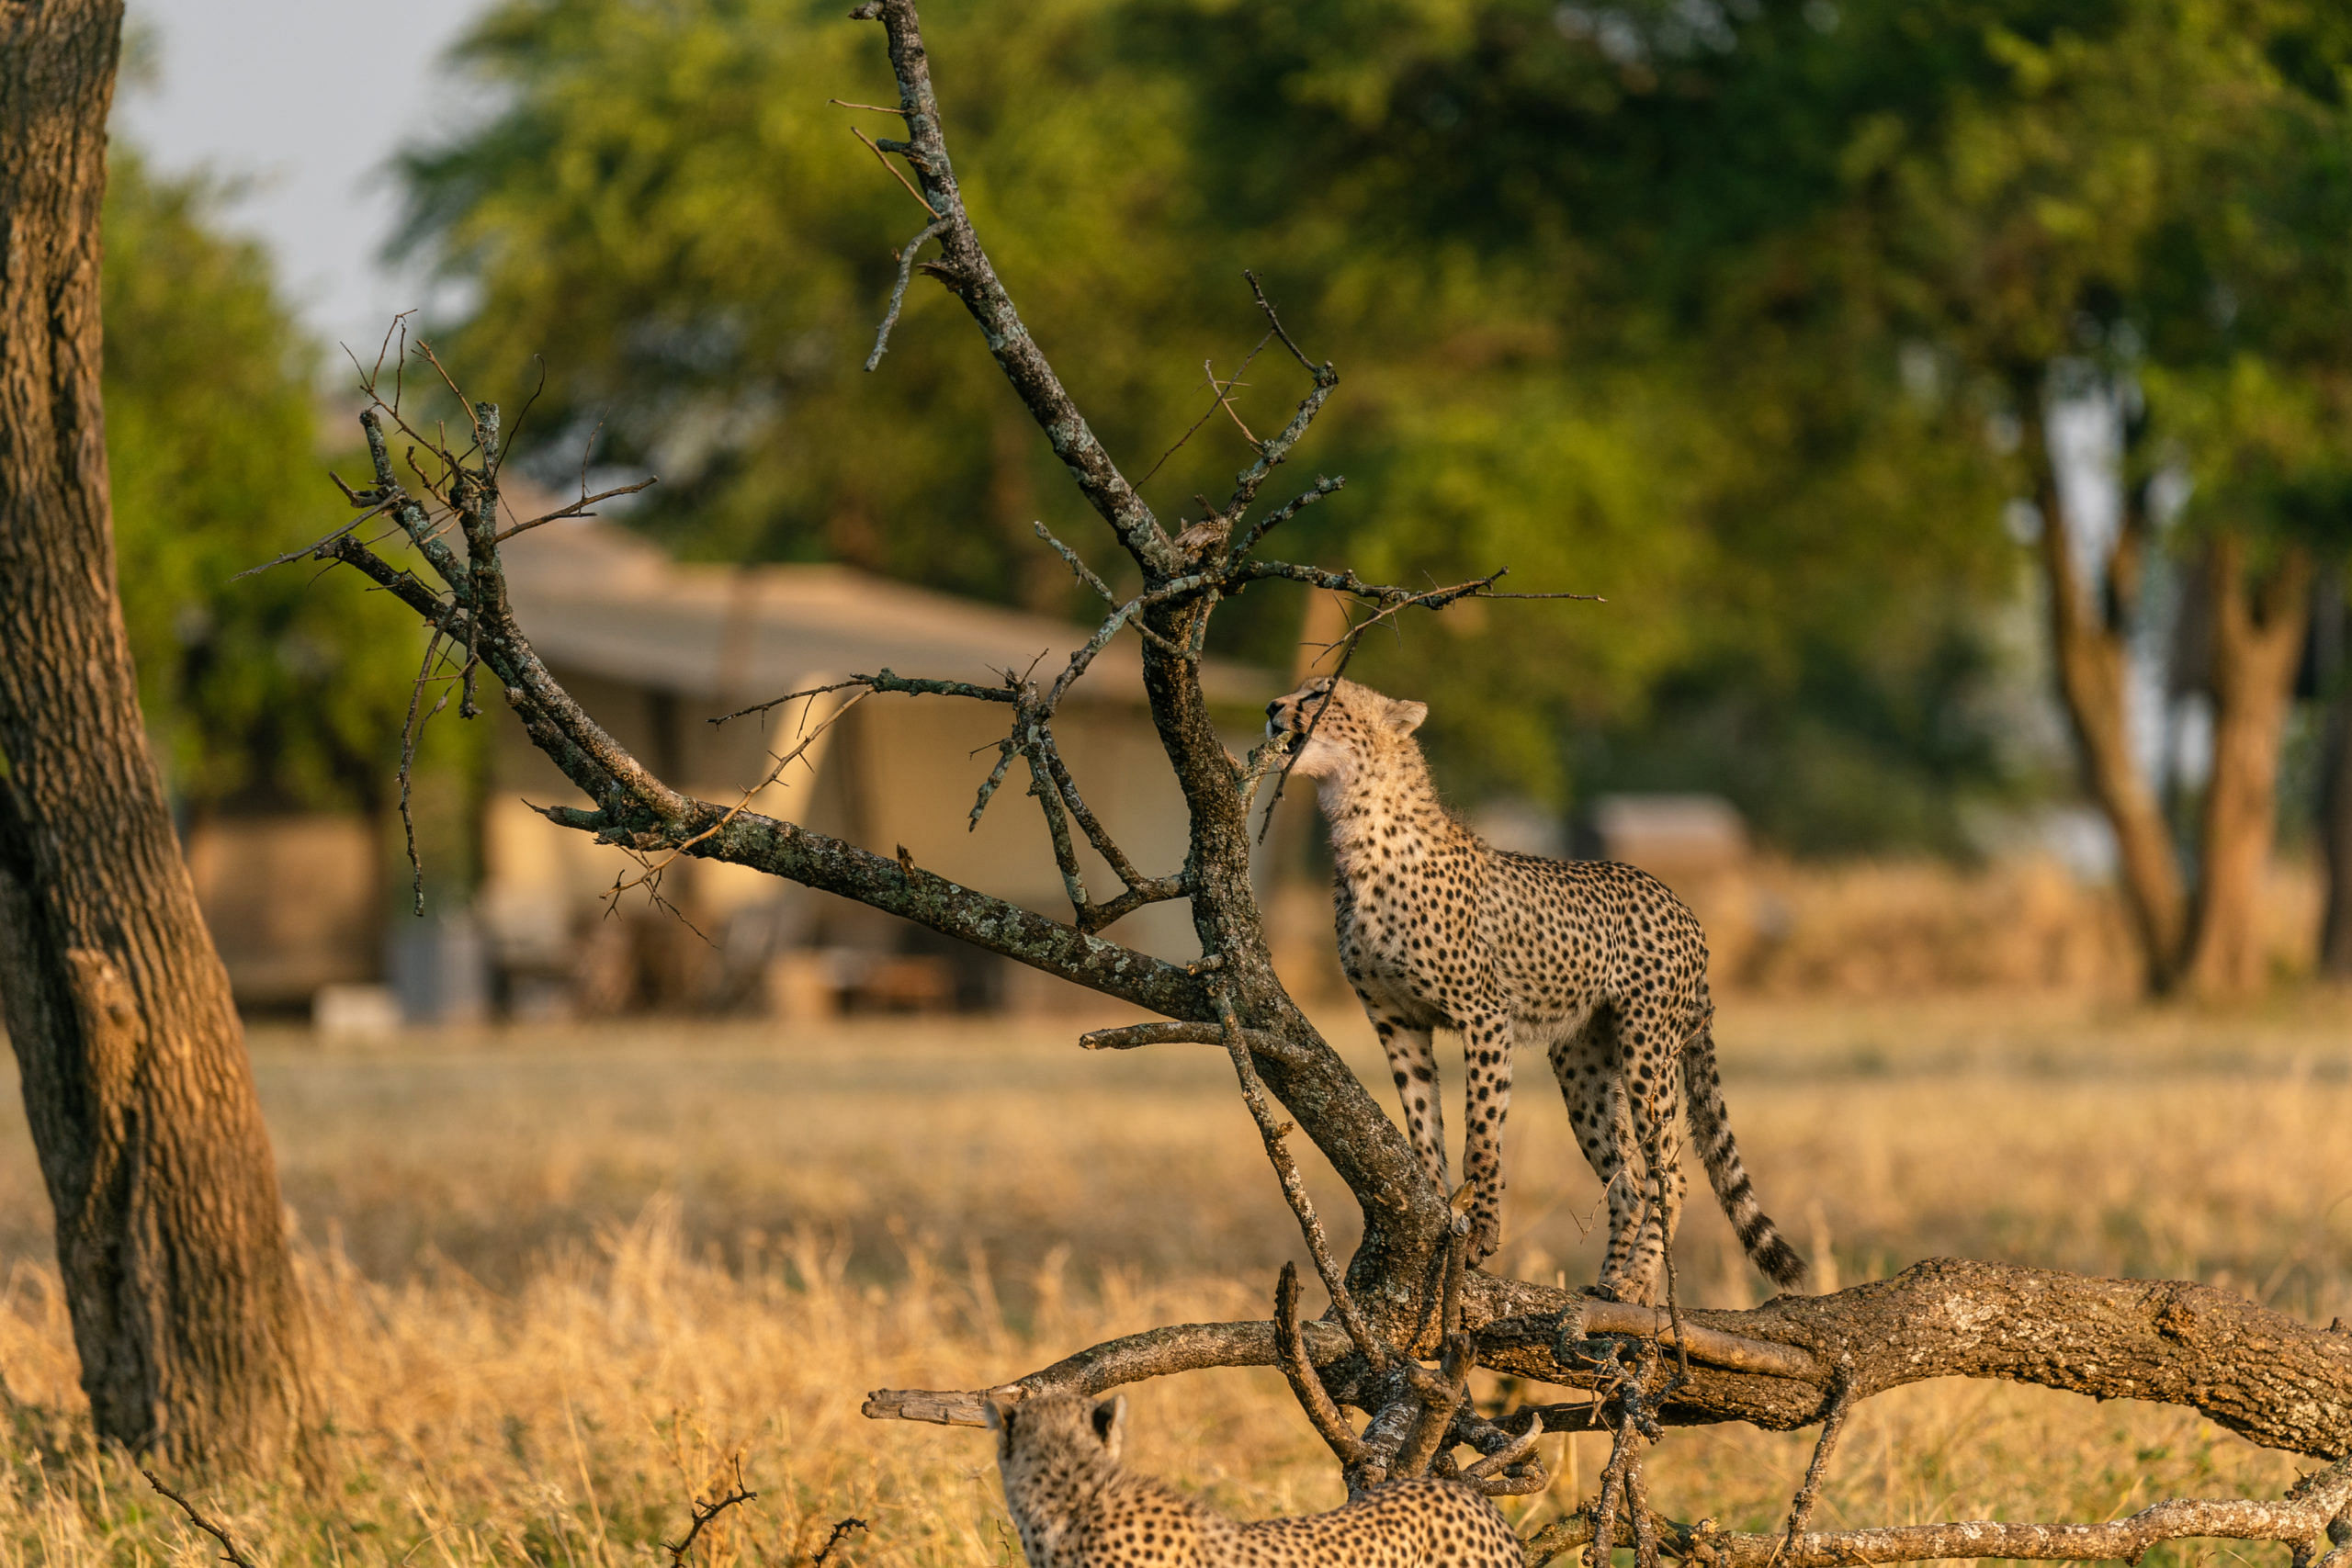 A cheetah in the wild, captured near the Sabora Tented Camp.